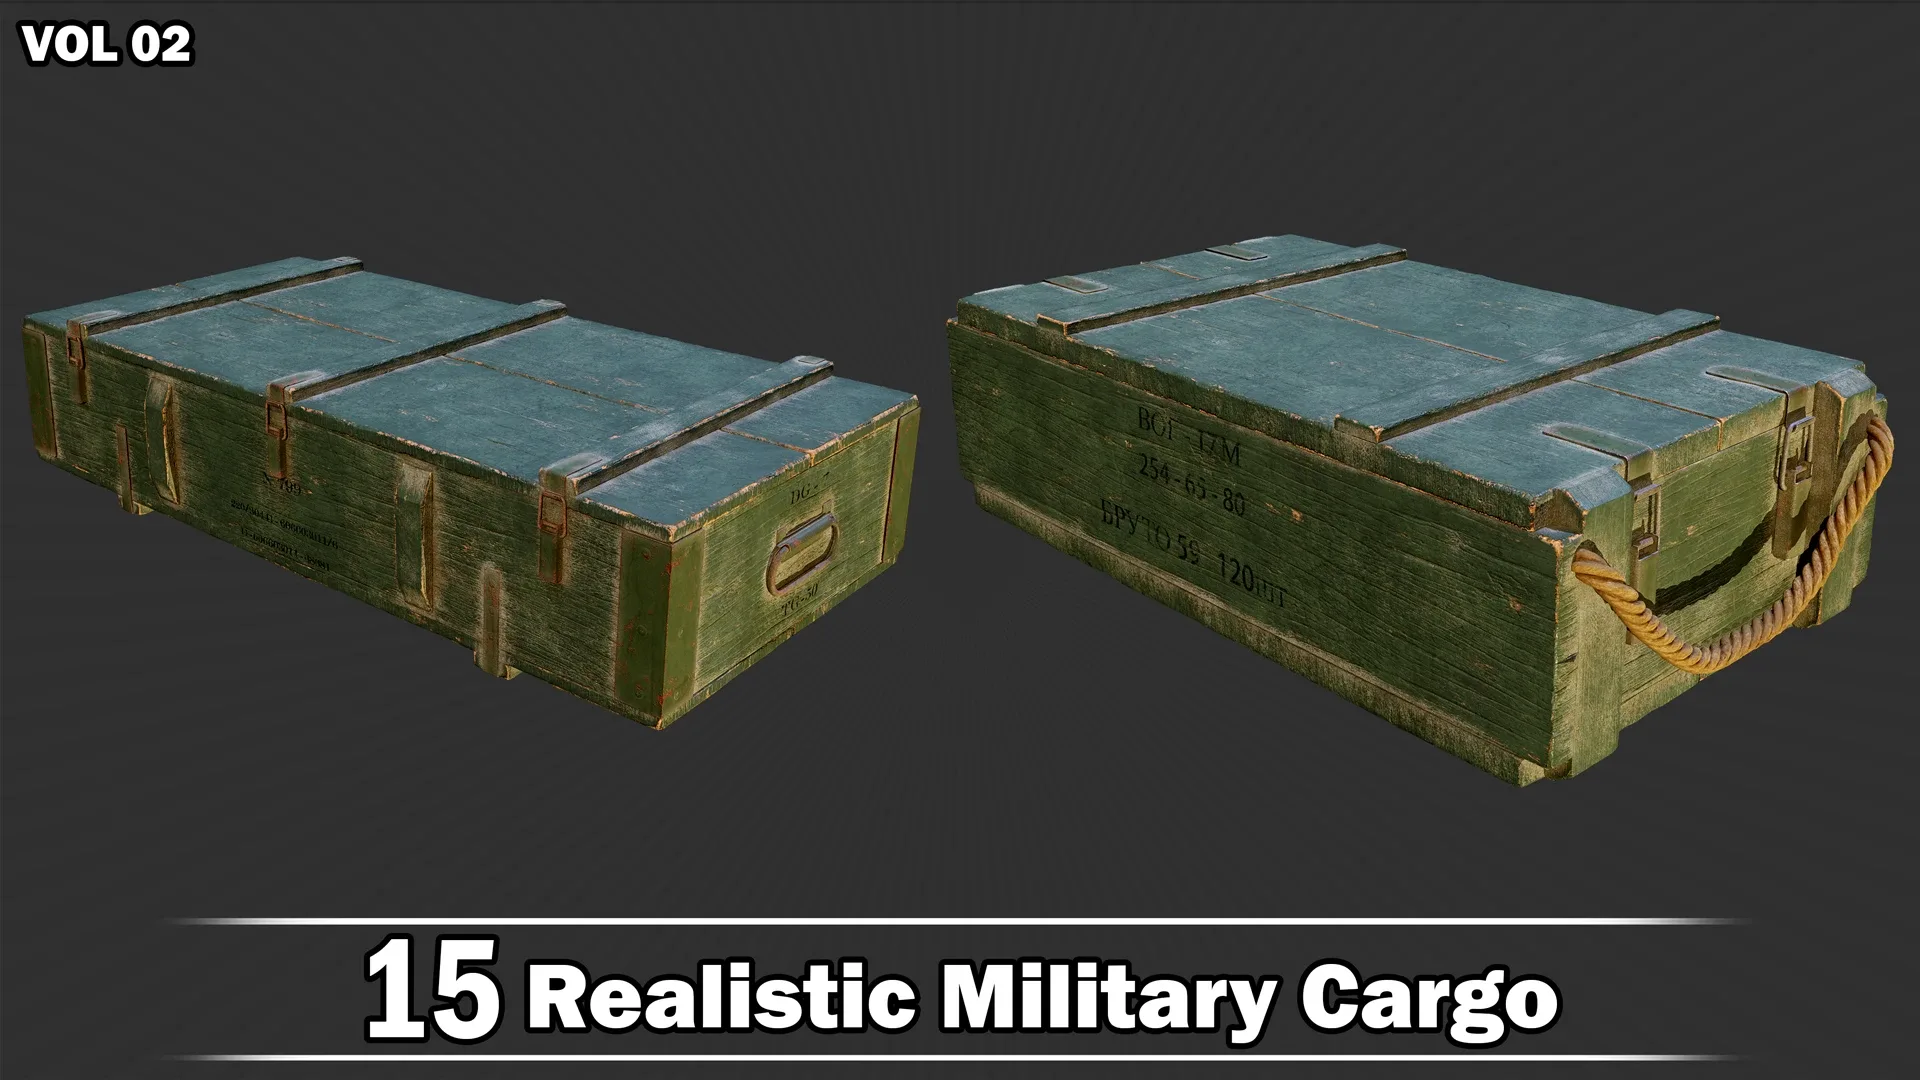 15 Realistic Military Cargo Game Ready VOL02